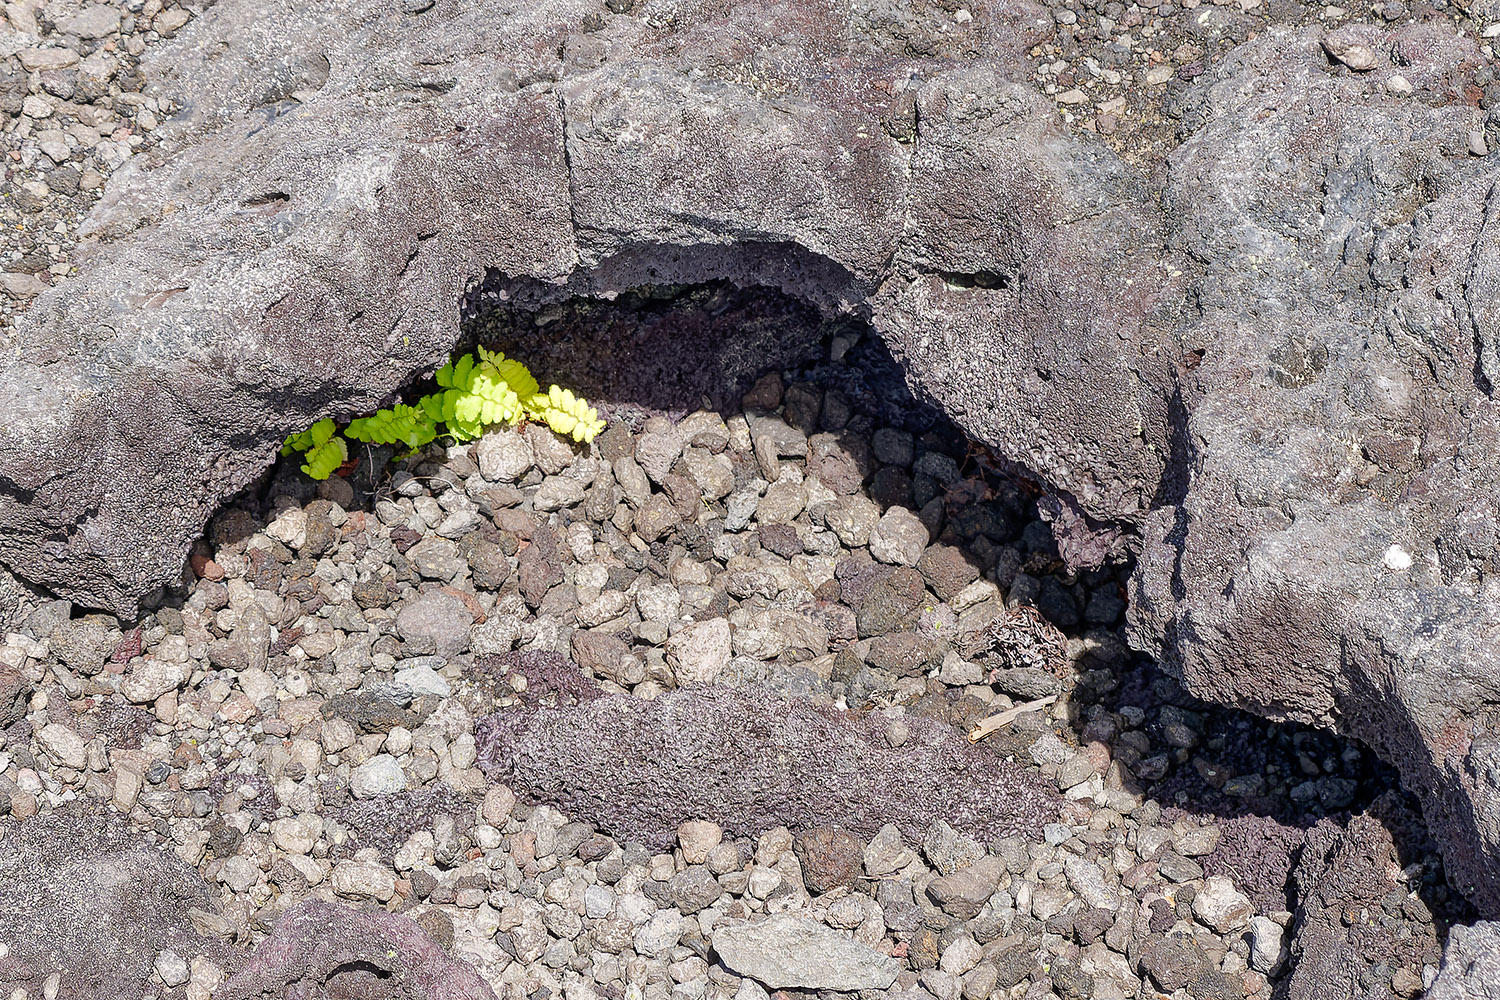 As early as one year after a lava flow, the first plants, usually ferns, appear